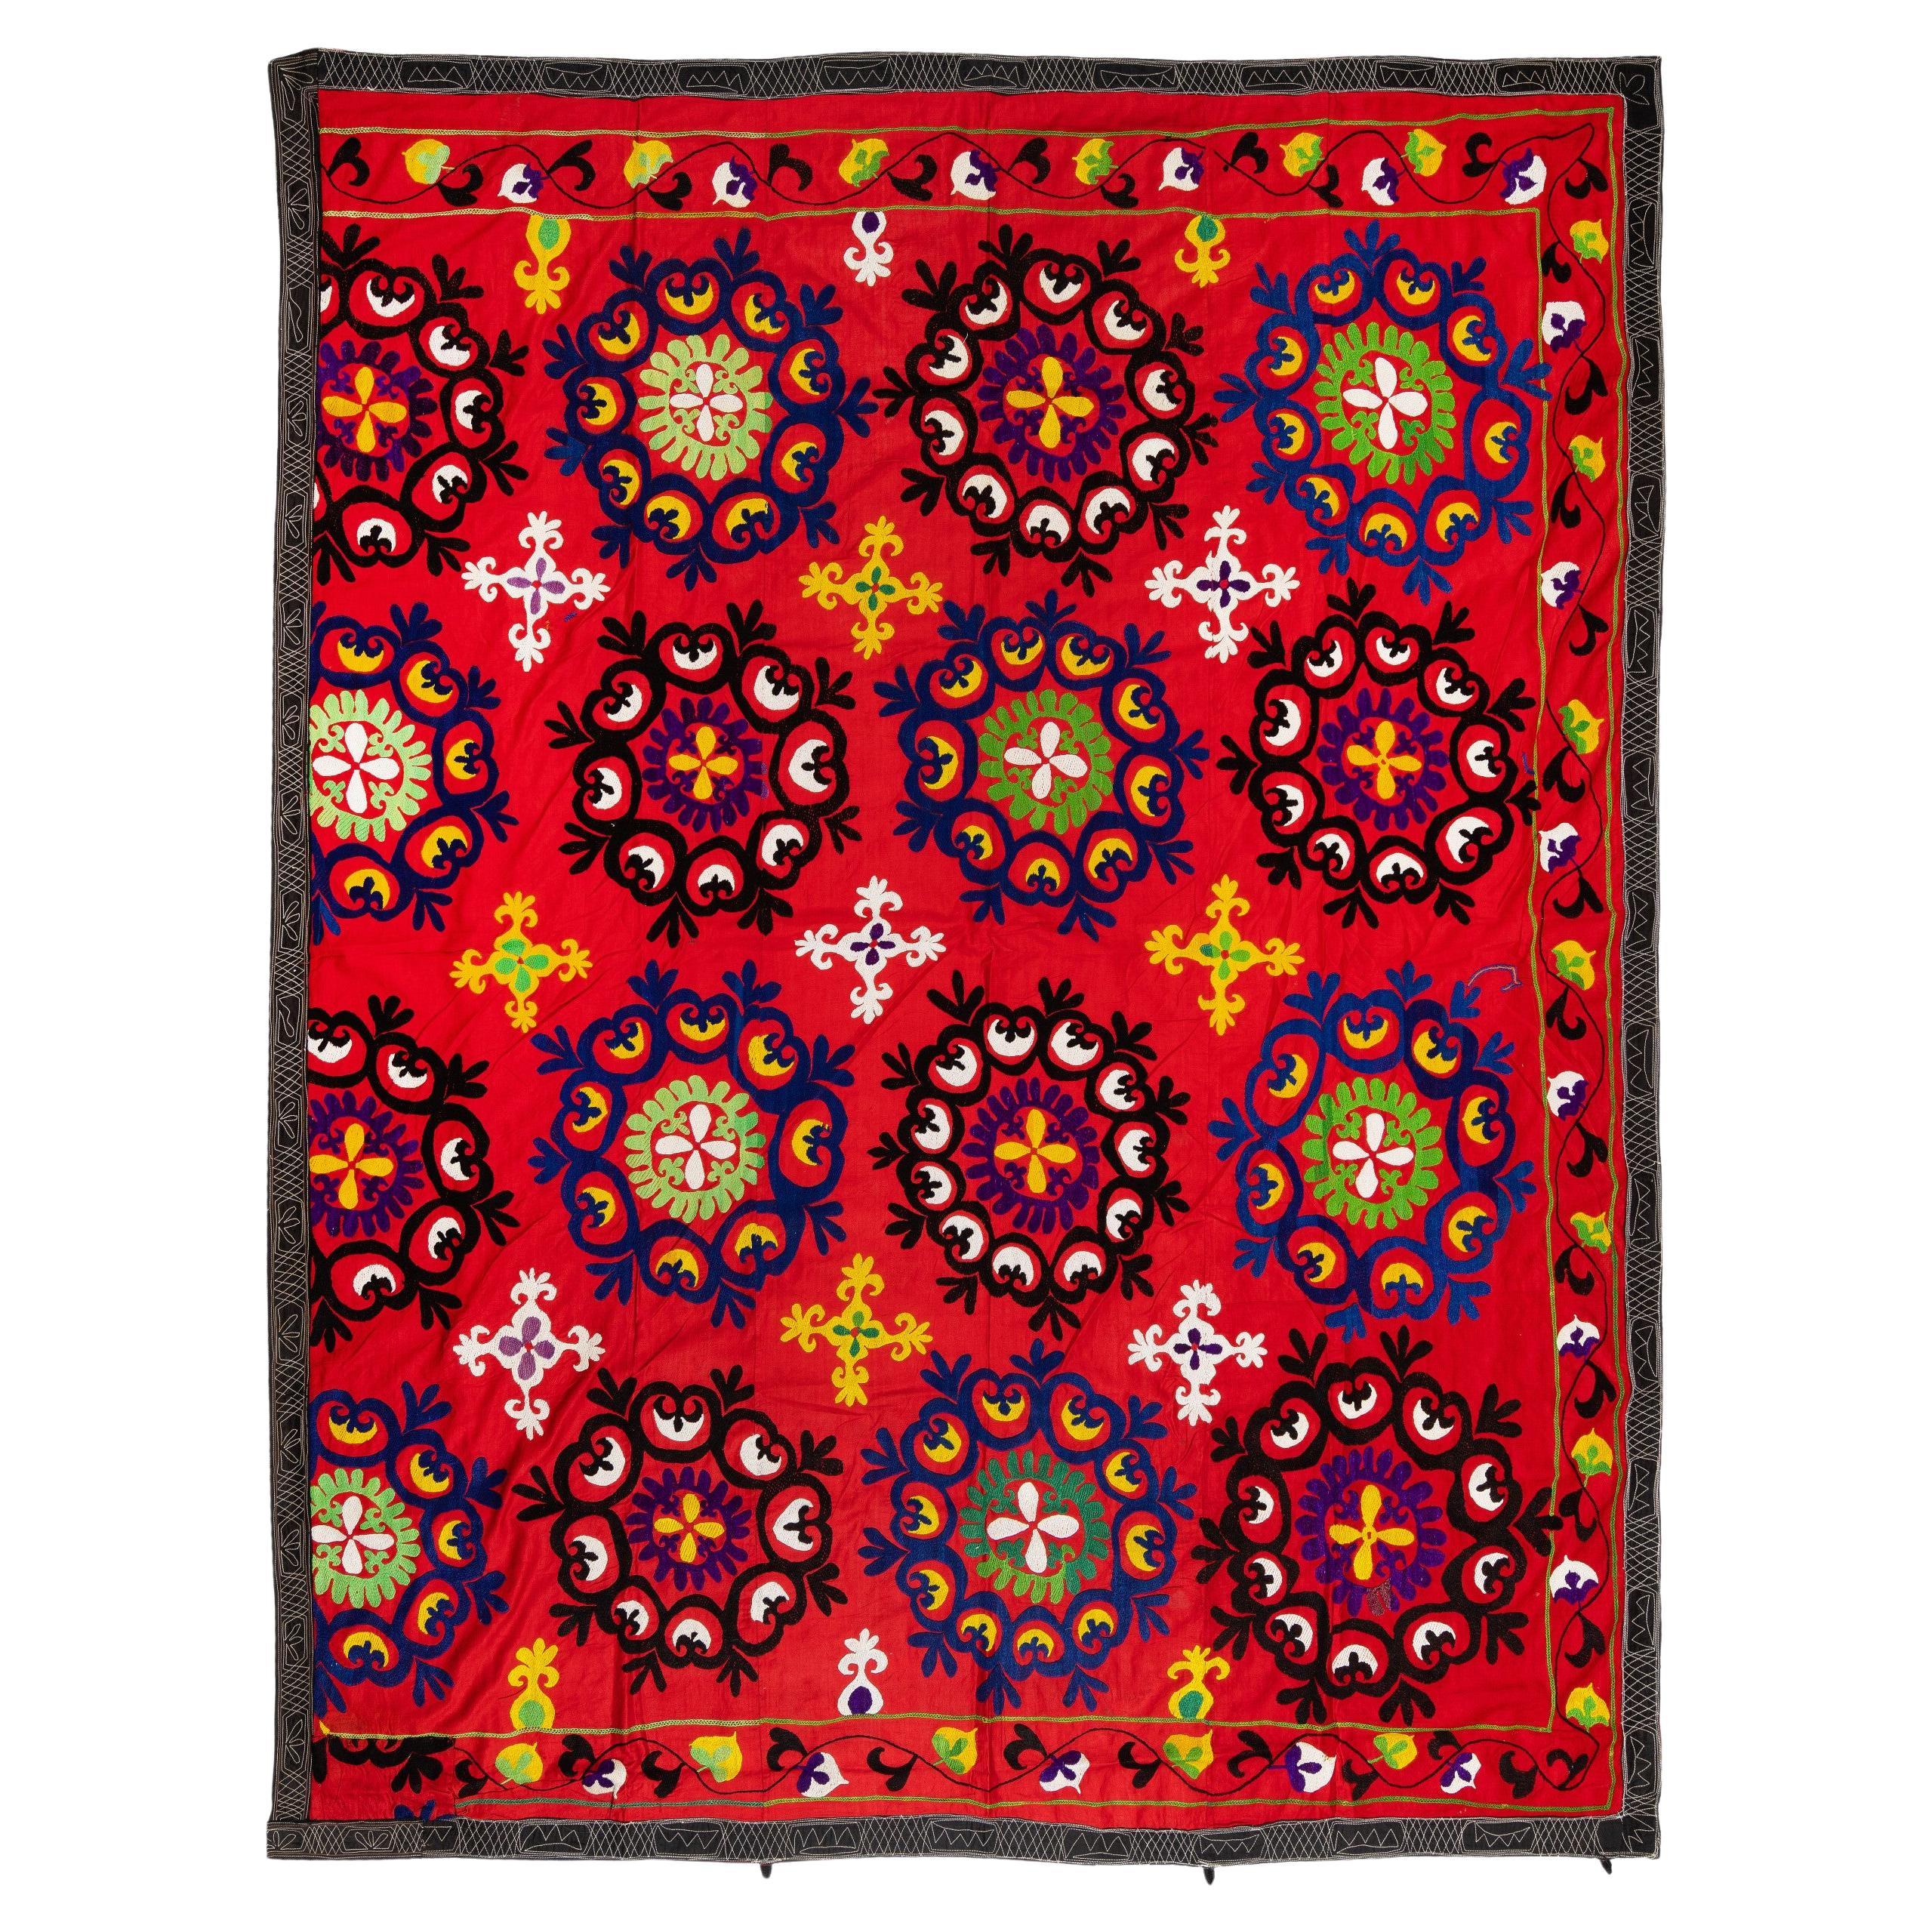 6x7.5 Ft Vintage Silk Embroidered Suzani Bed Cover, Traditional Red Wall Hanging